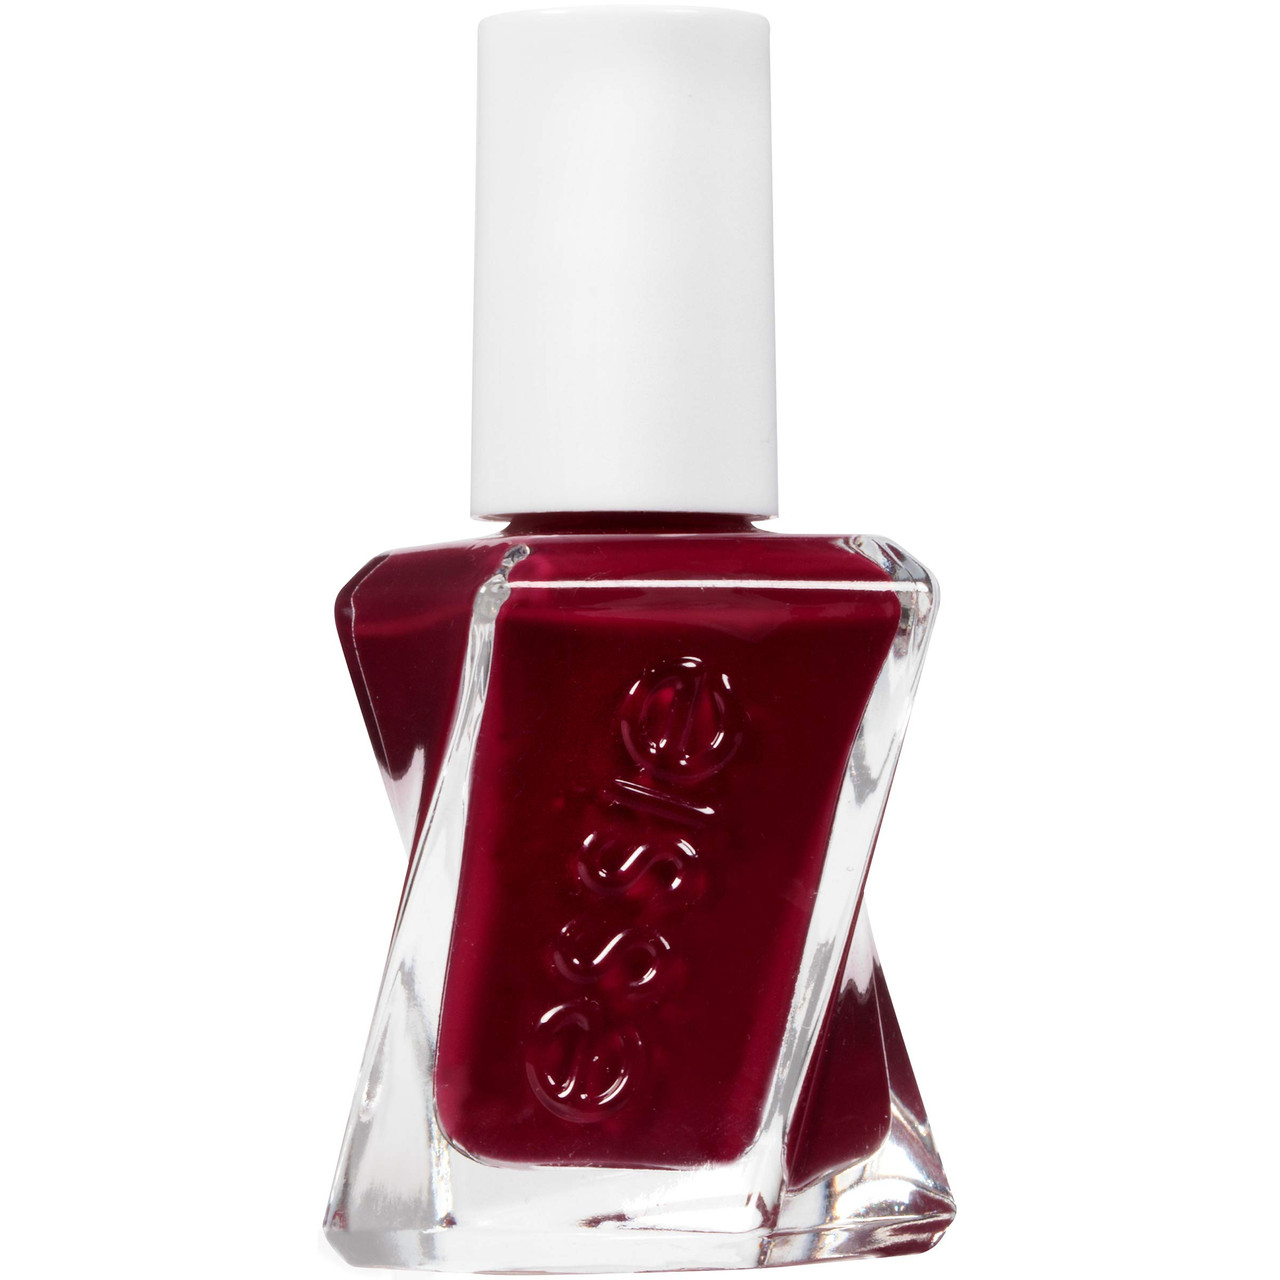 ILNP Bitten - Deep Blood Red Jelly Shimmer Nail Polish